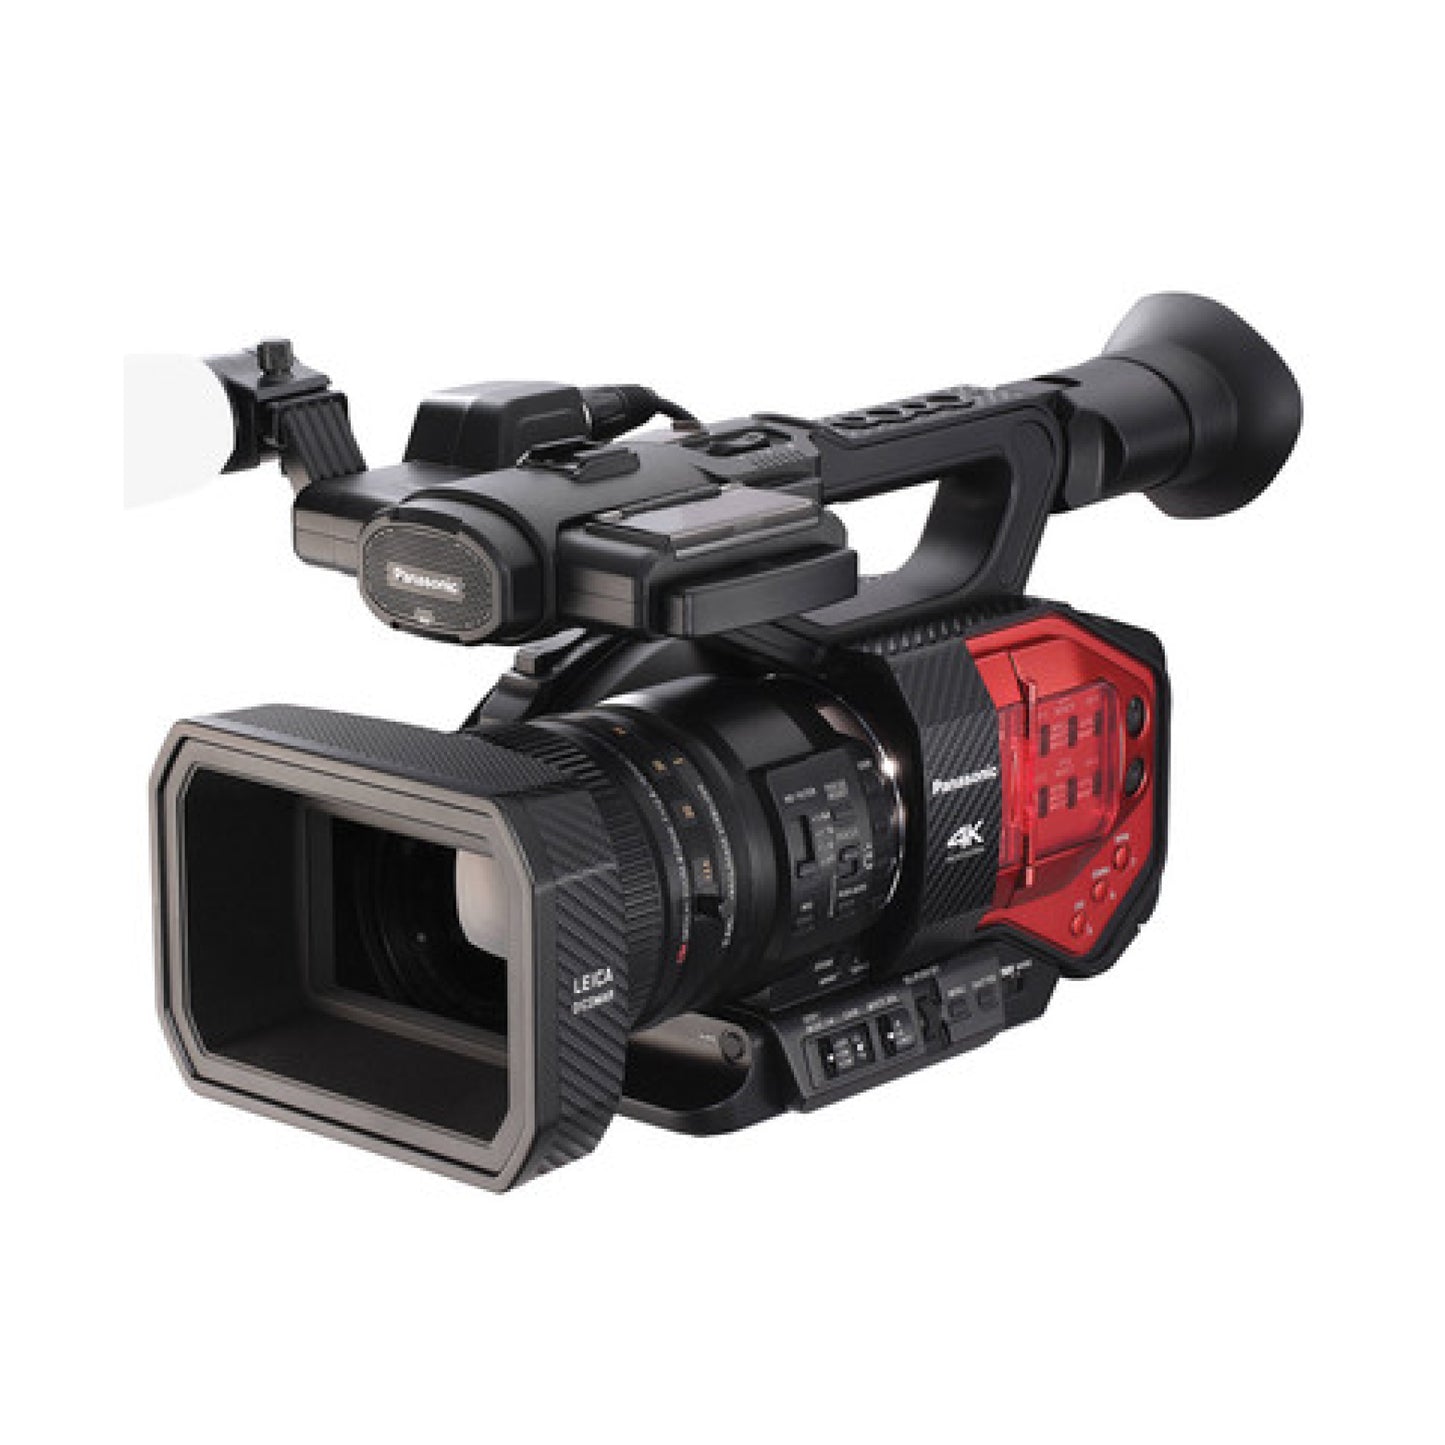 Panasonic DVX 200 Video Camcorder for hire